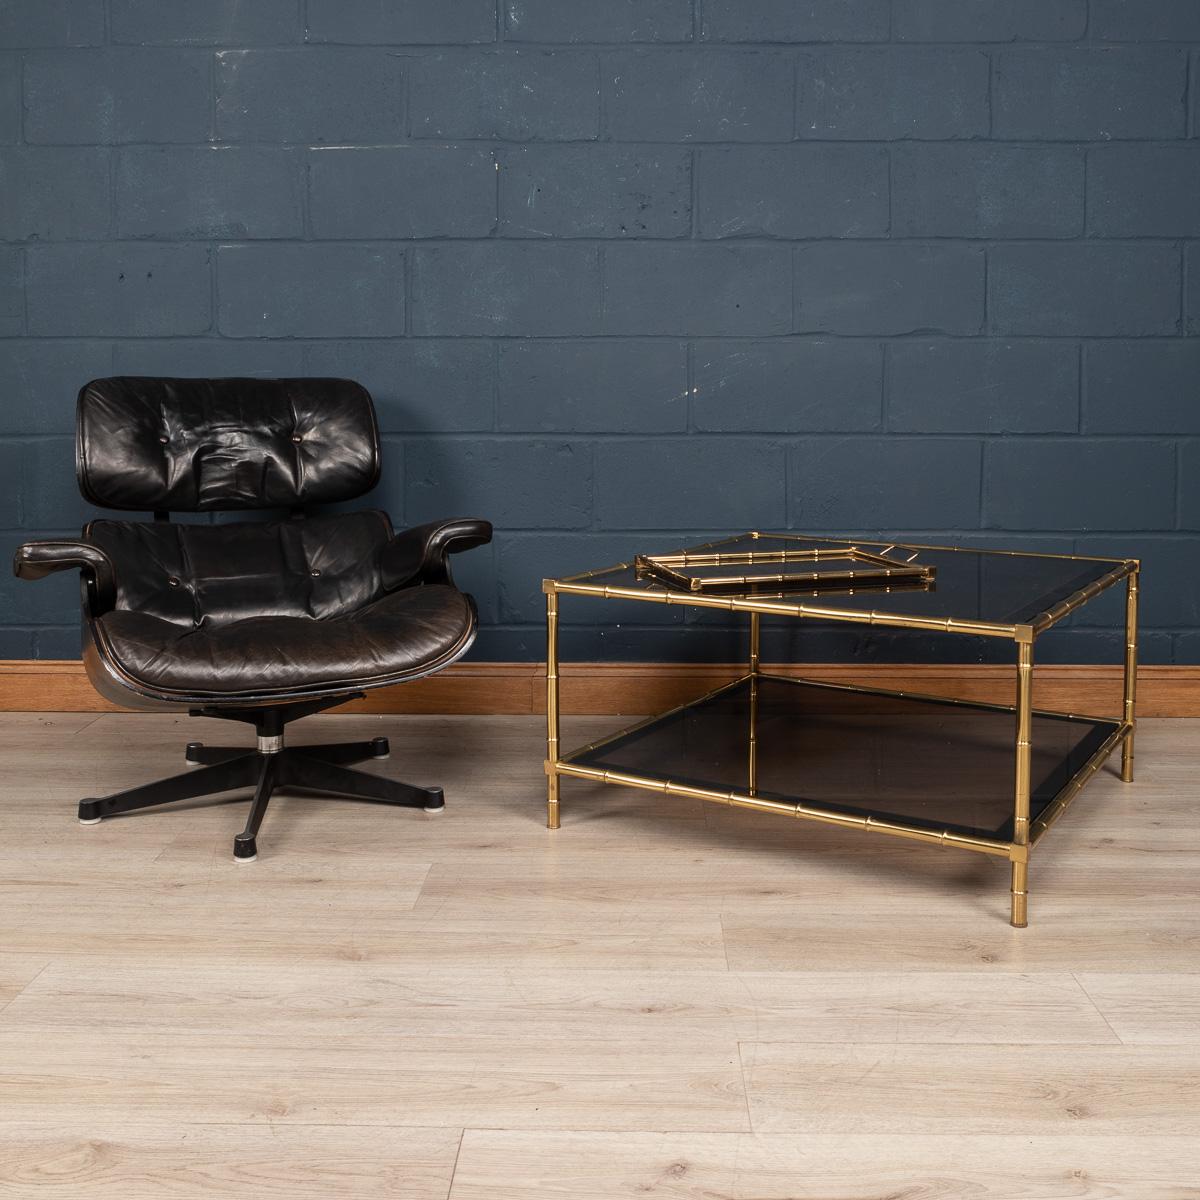 A very large coffee table by Maison Jansen, made in France around the 1970s. The faux bamboo frame made out of brass supporting dark smoked glass on two levels. A truly elegant solution for any interior looking to enrich the room with a little